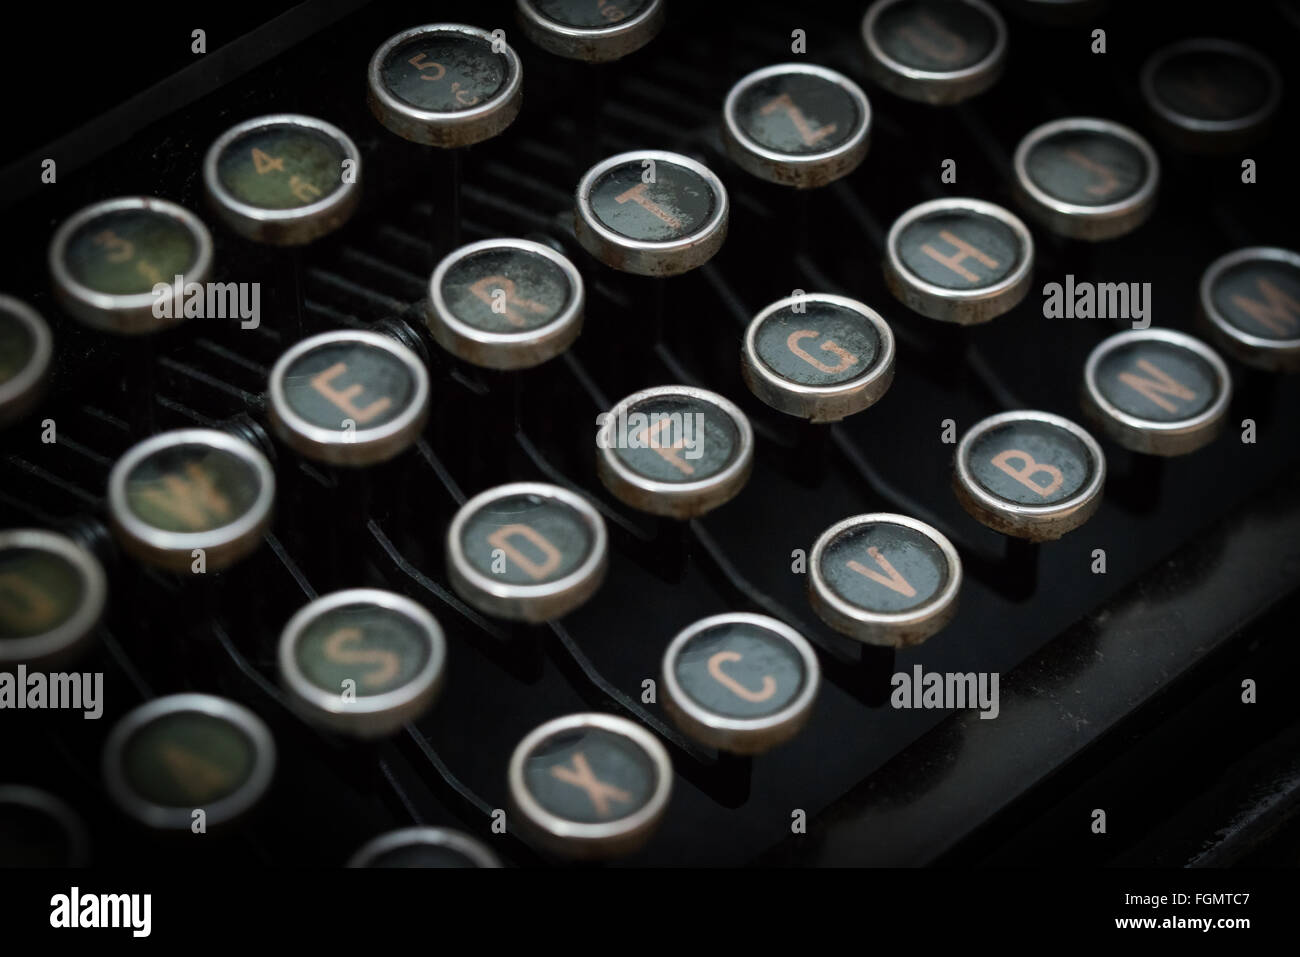 Closeup of the keys of an old typewriter Stock Photo